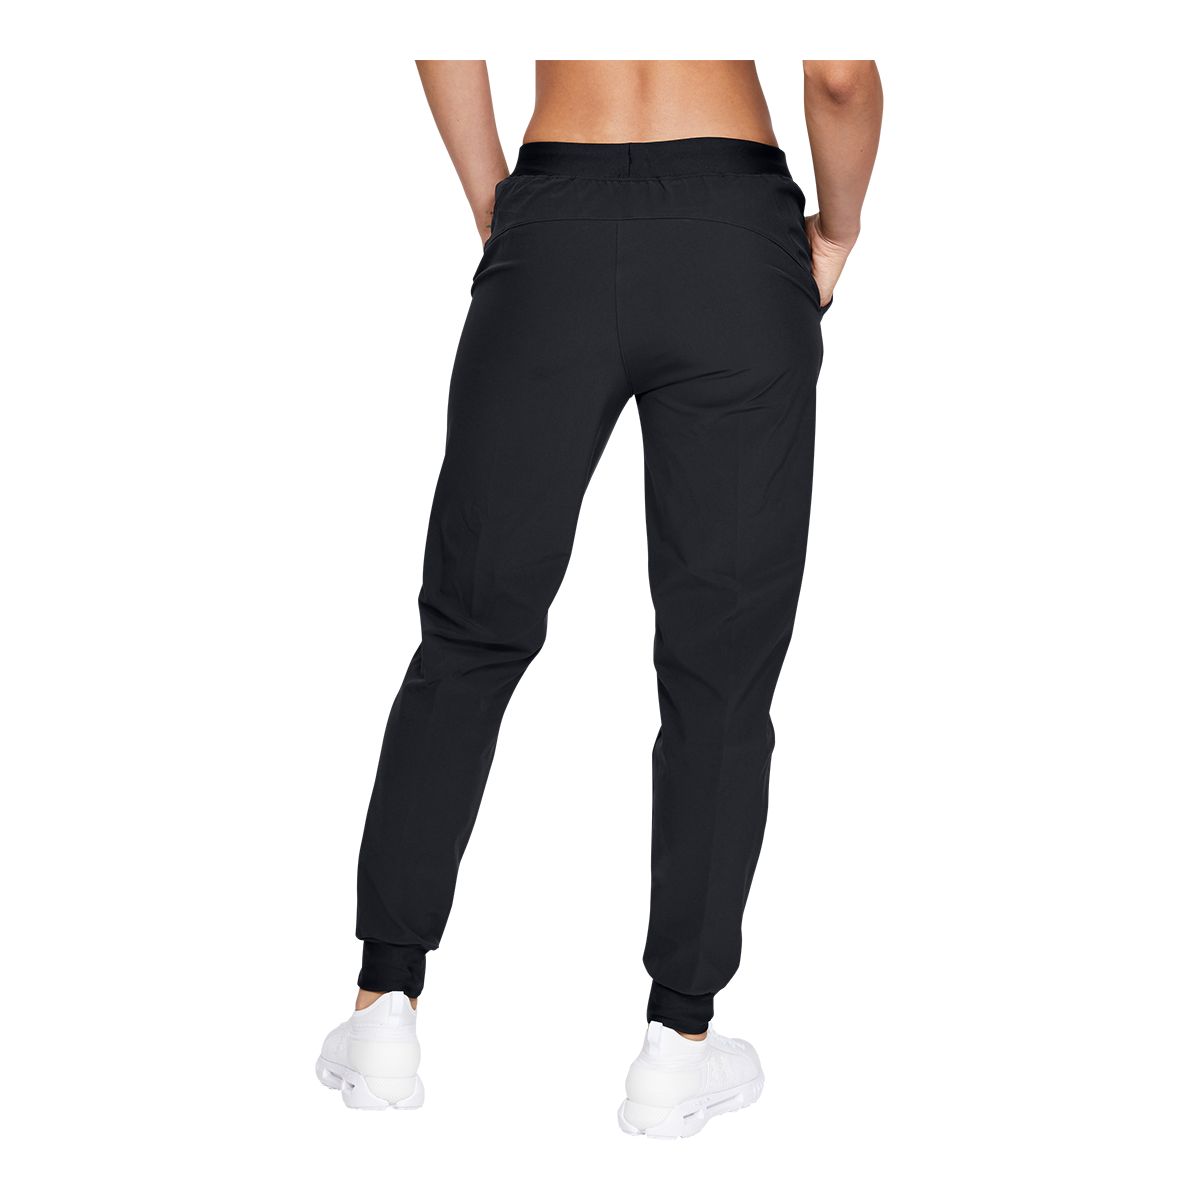 Under Armour Lined Athletic Pants for Women